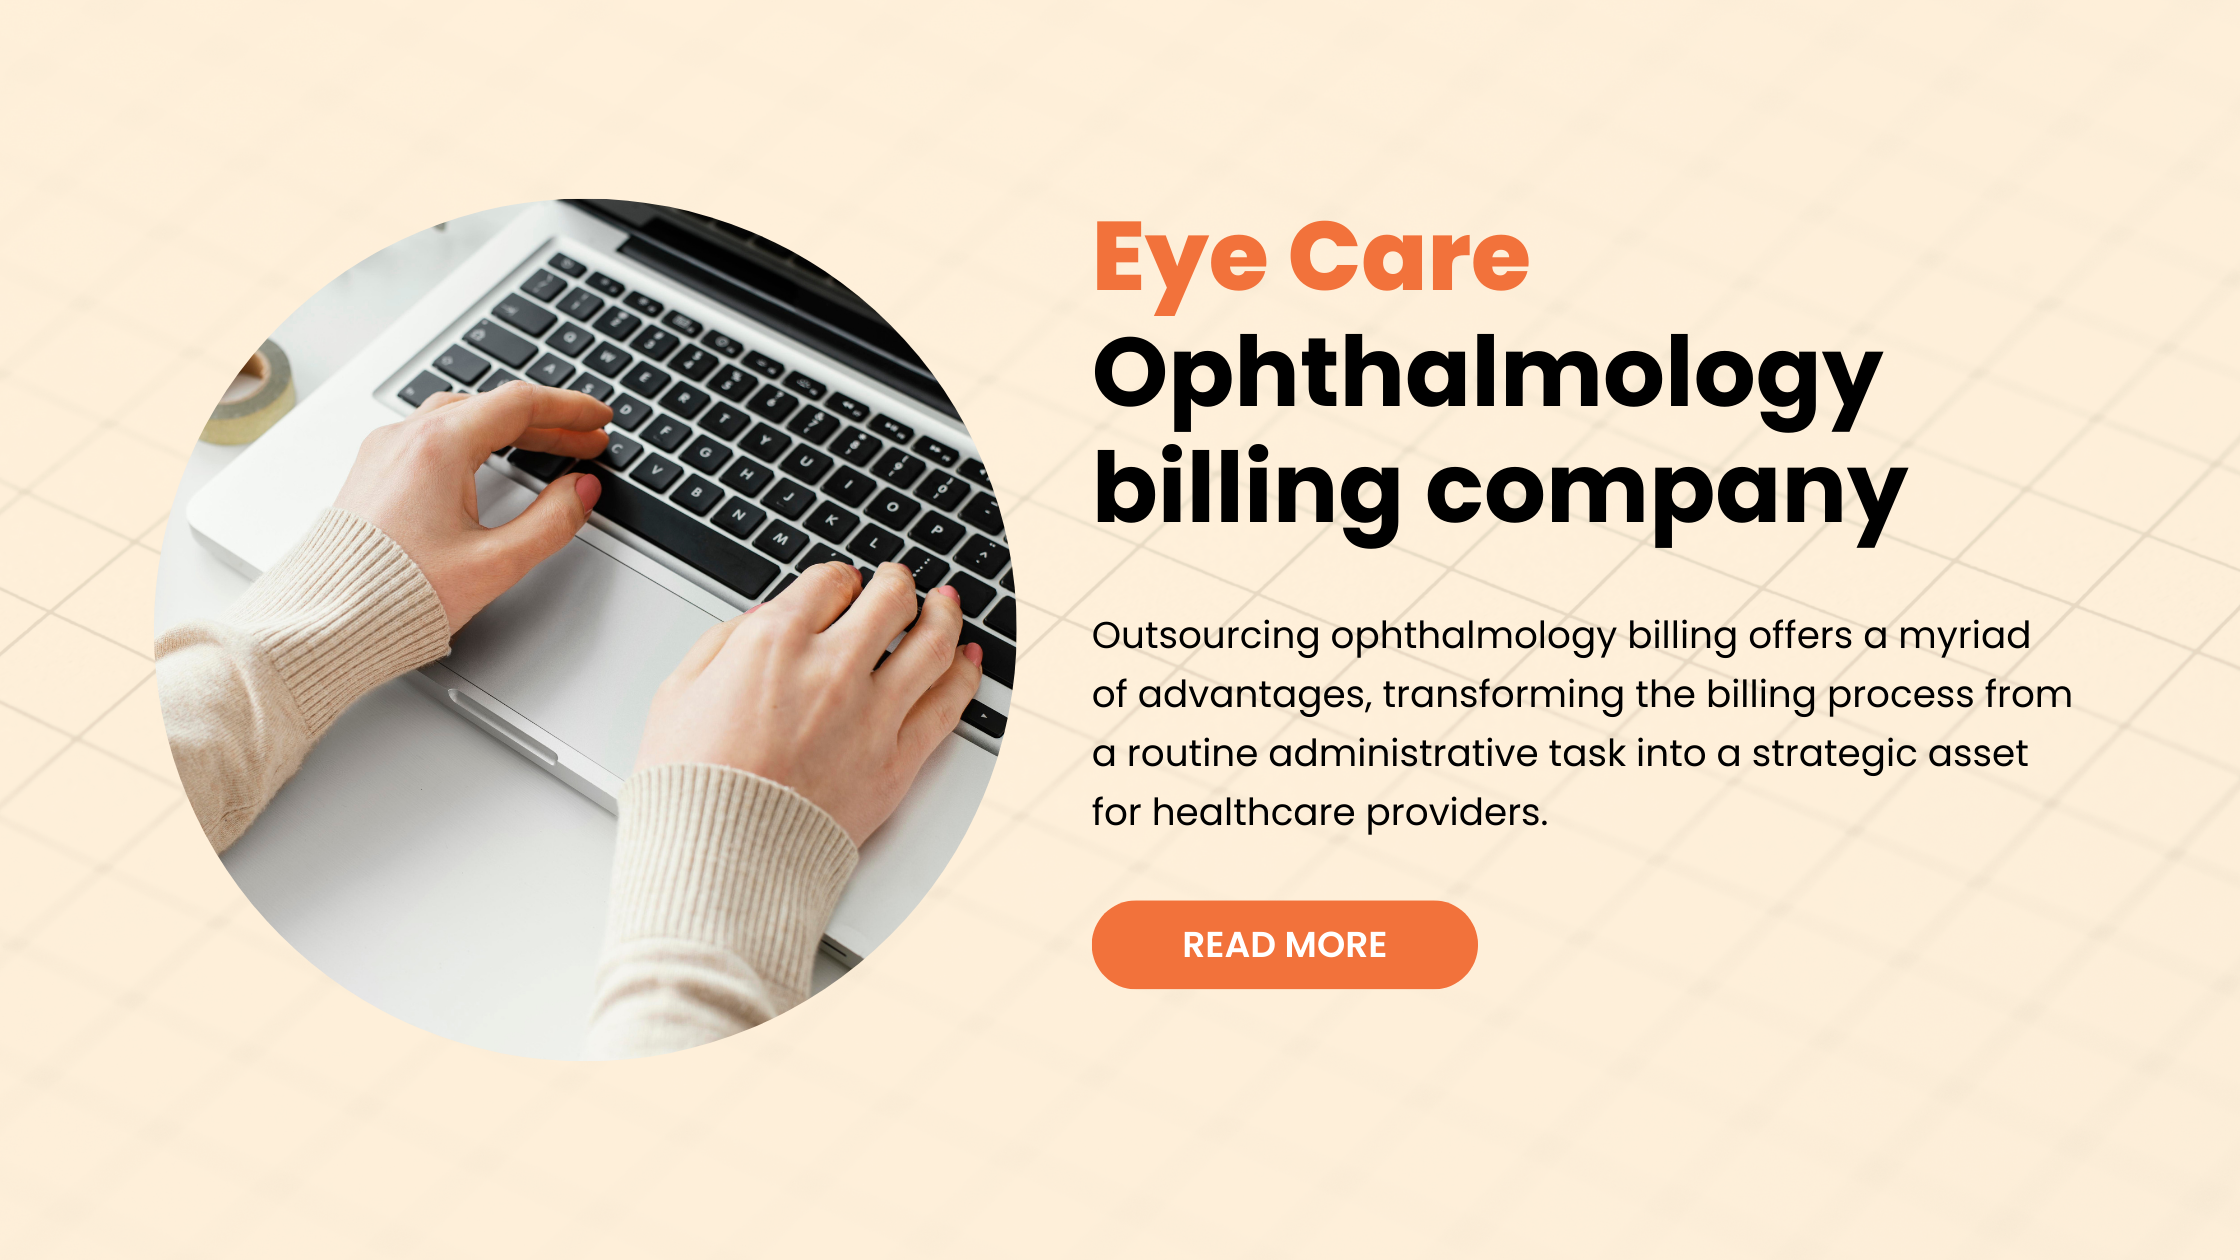 Outsourcing ophthalmology billing